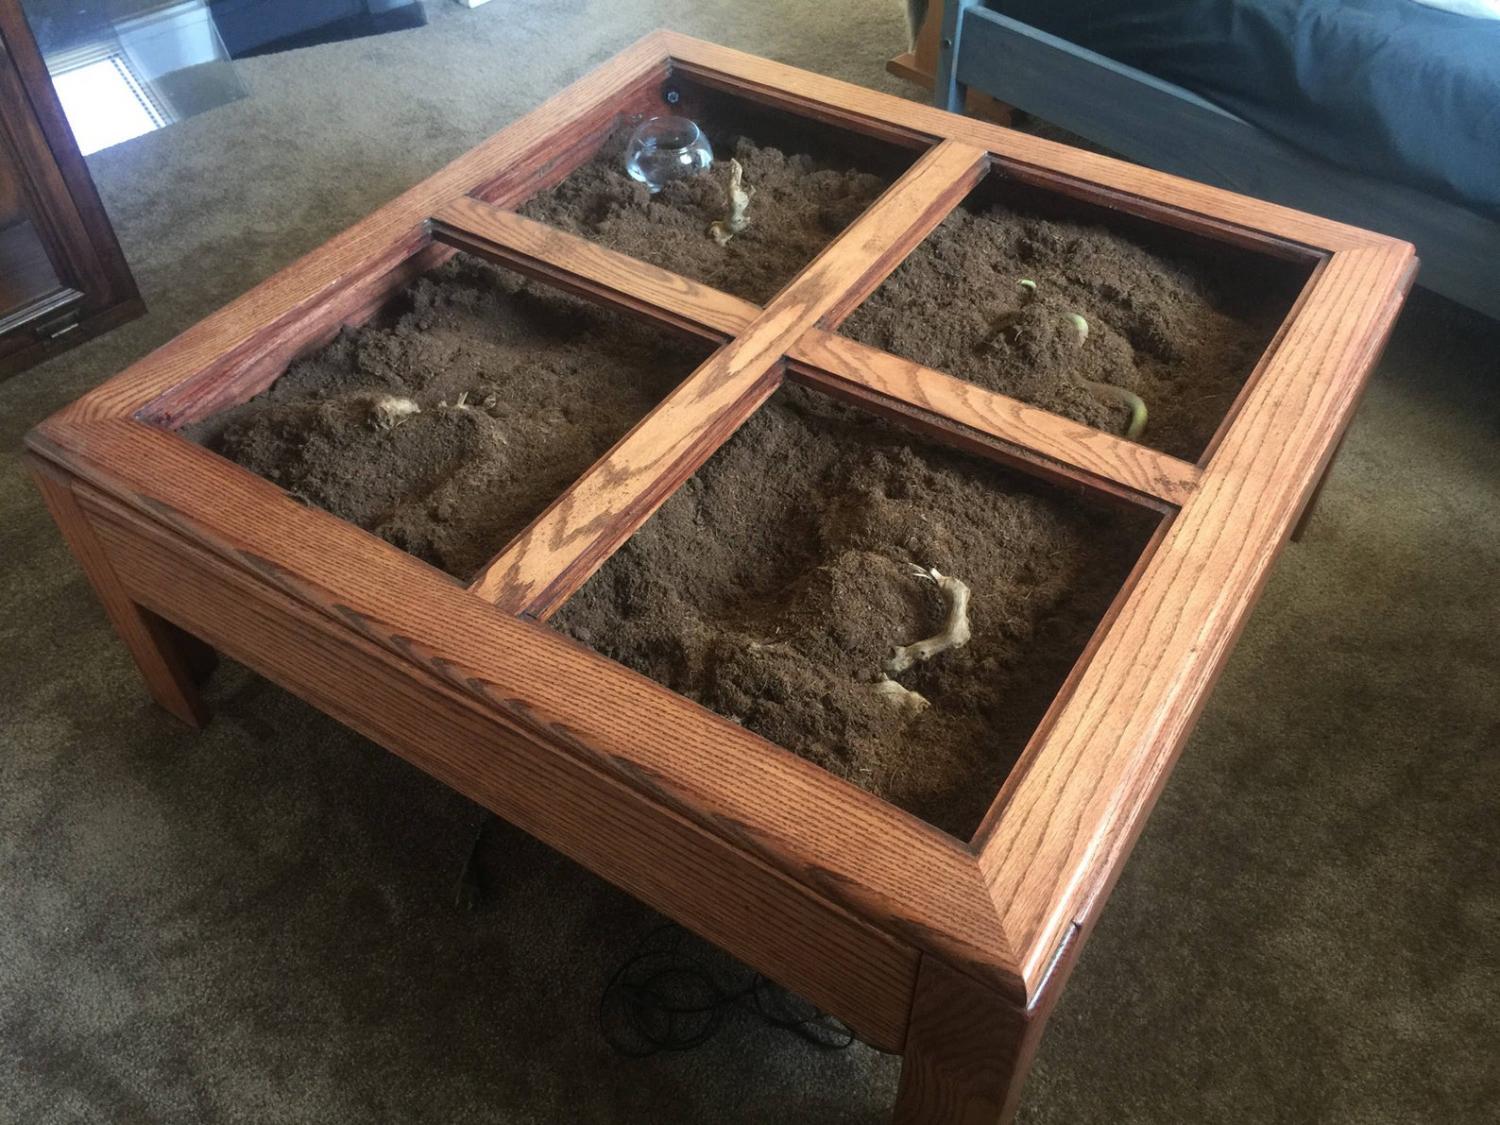 The brown wooden frame of the Terrarium Coffee Table divided into our parts filled with soil